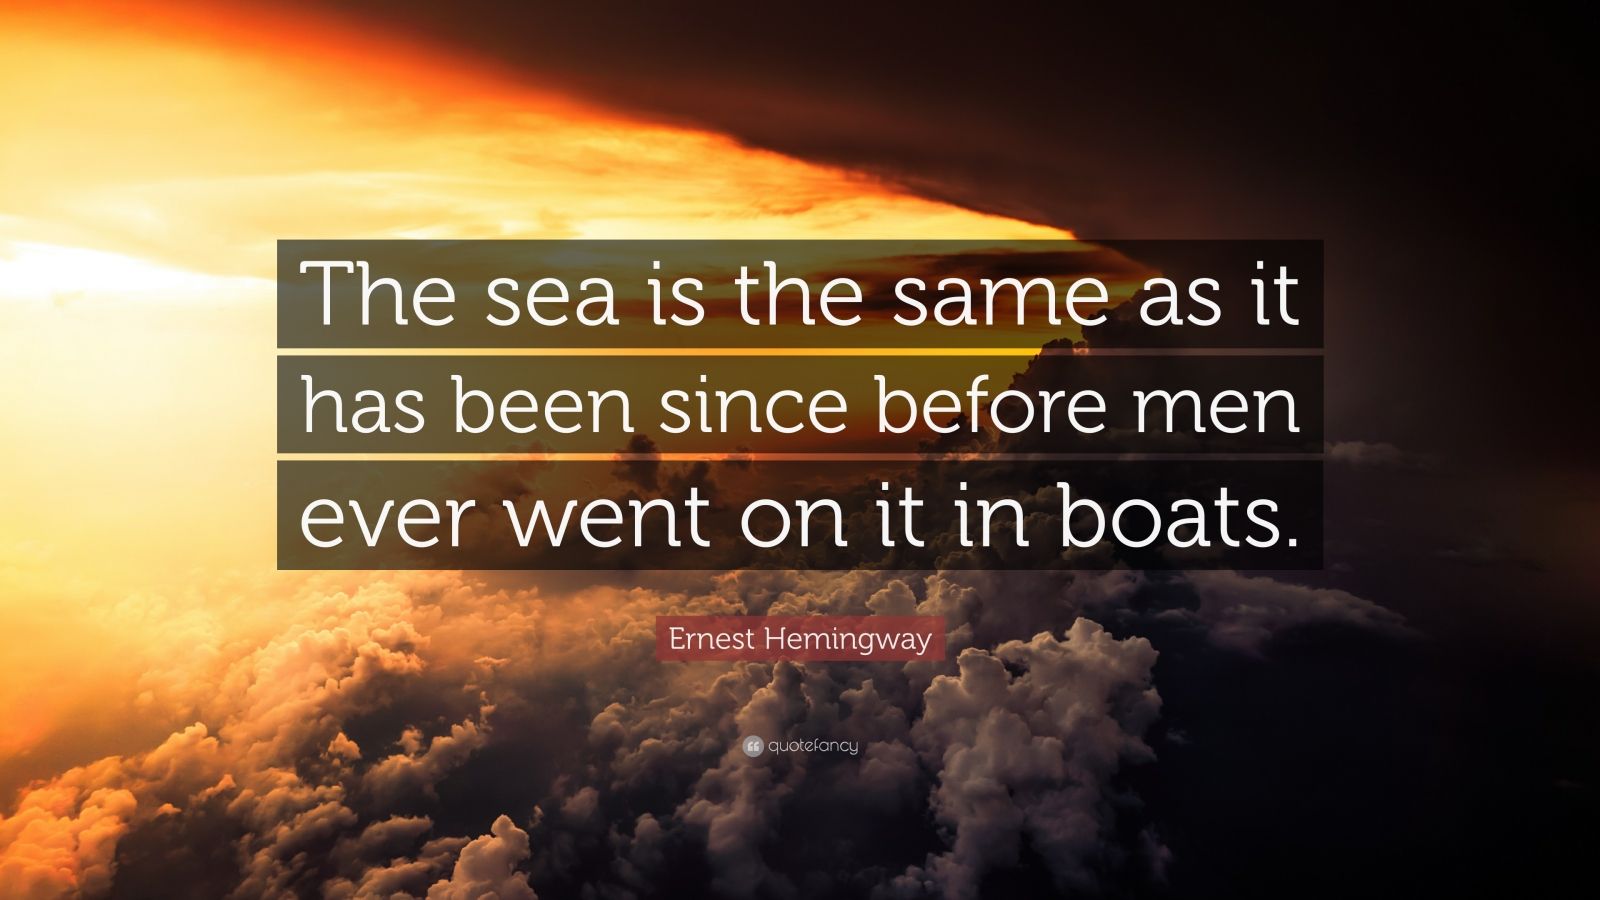 Ernest Hemingway Quote: “The sea is the same as it has been since ...